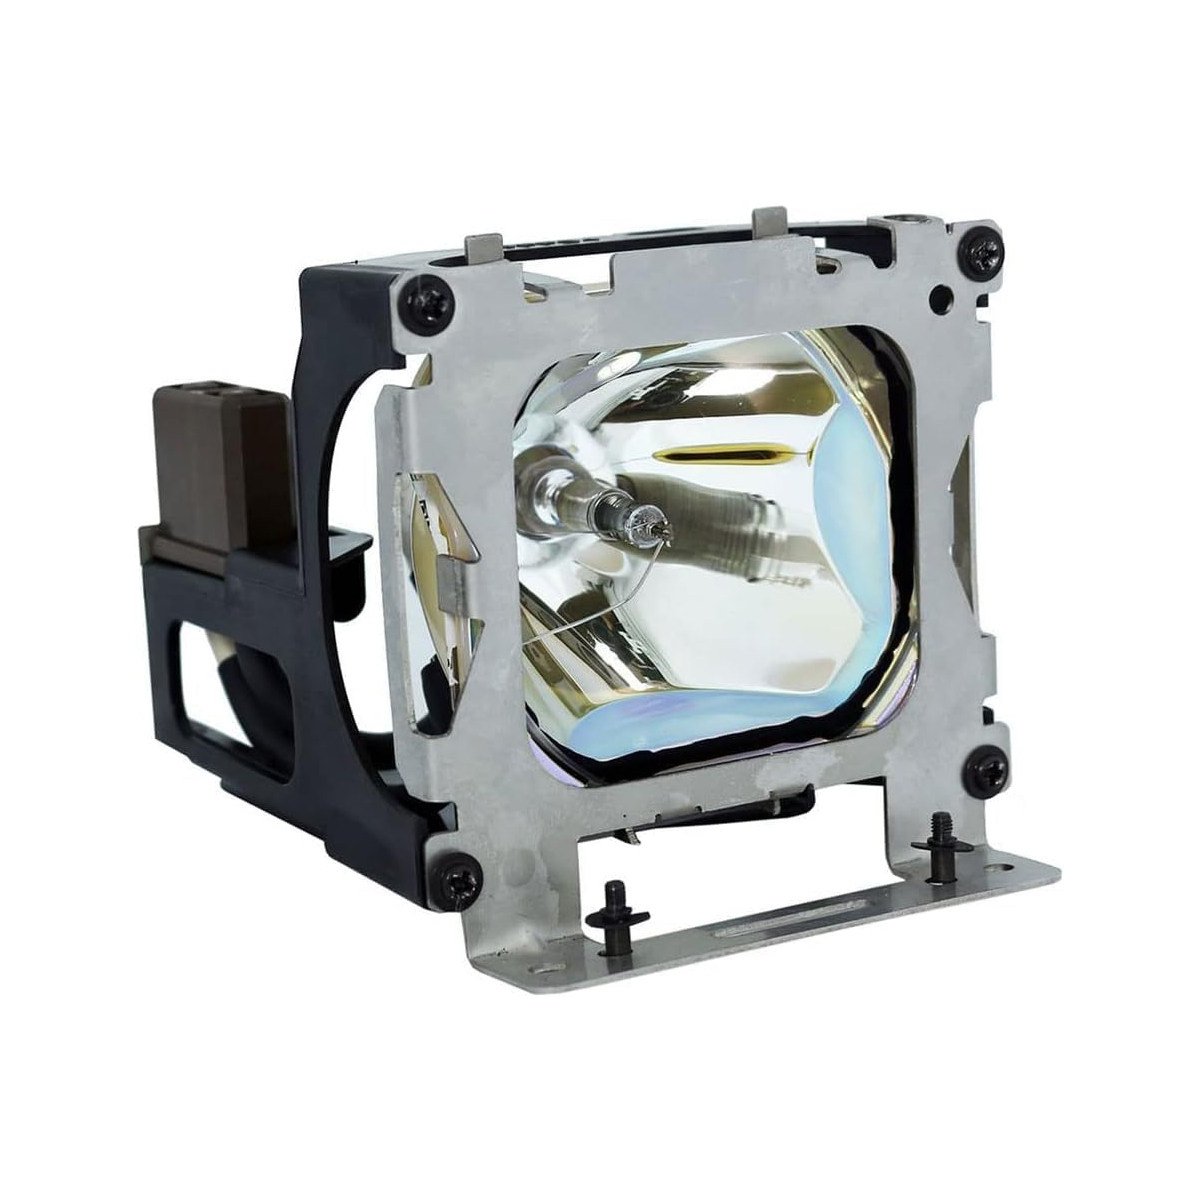 Replacement Projector lamp LAMP-017 For PROXIMA DP6850 DP6850 +